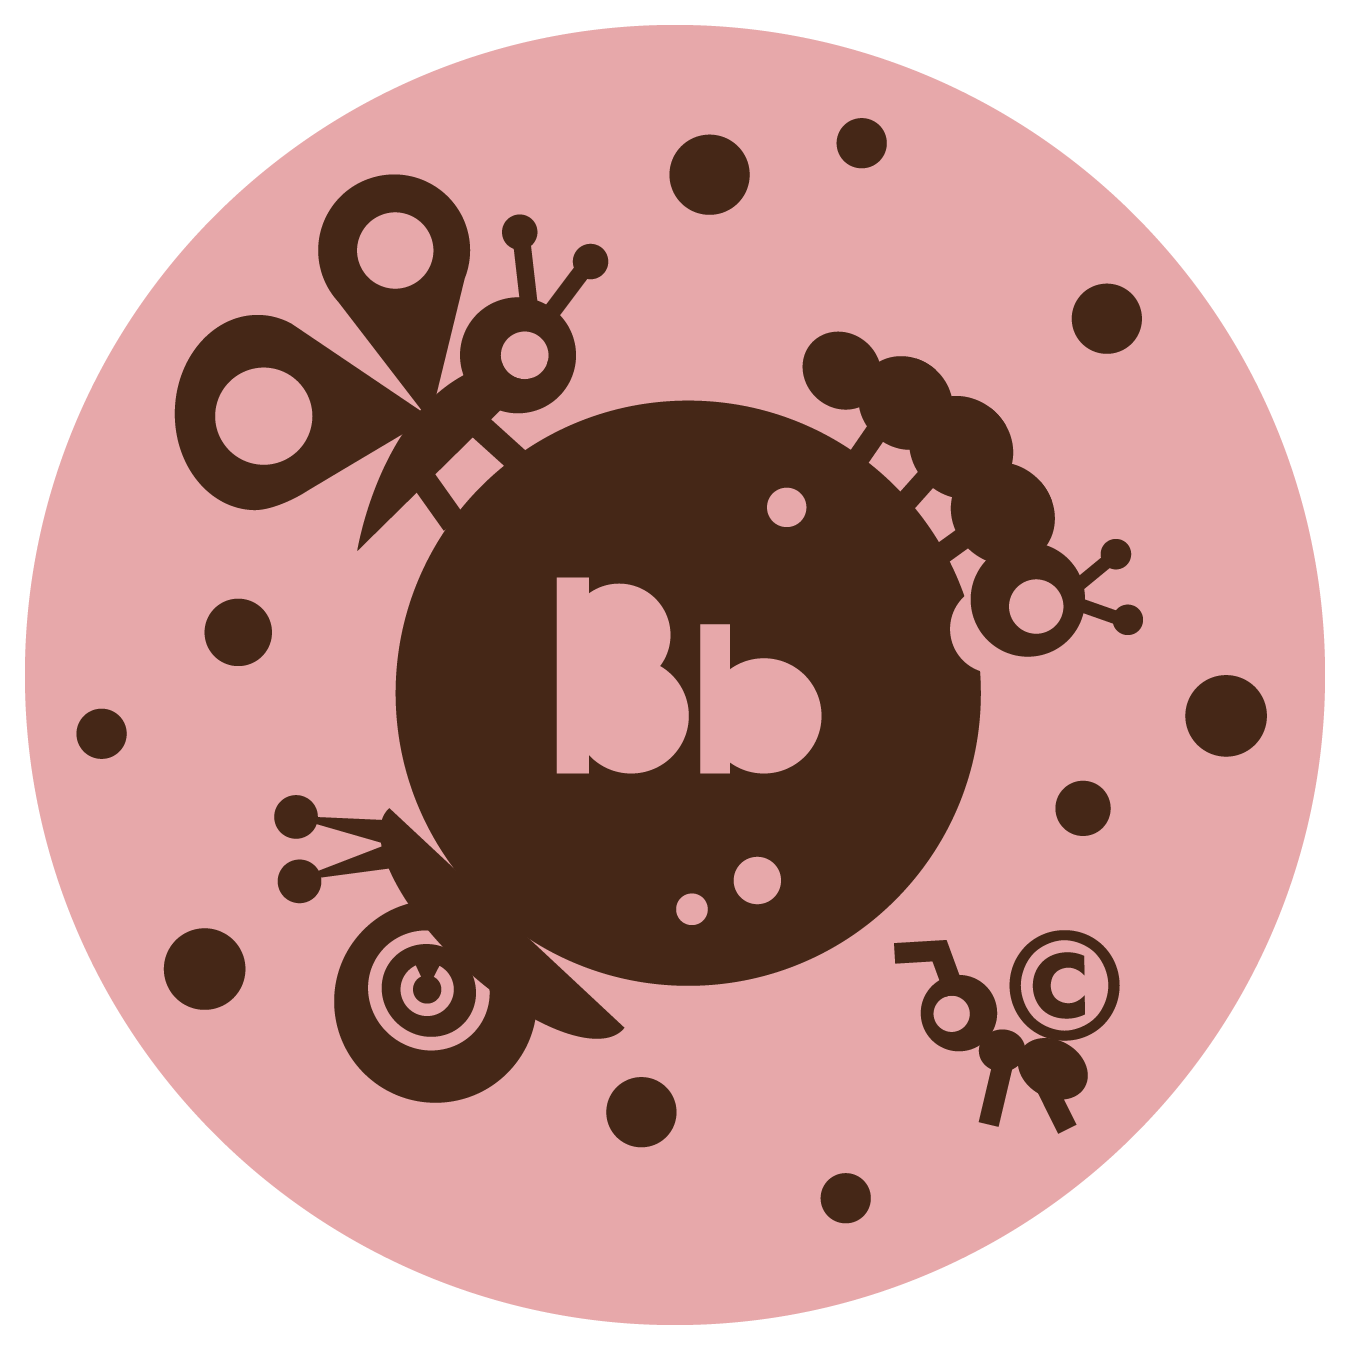 An illustrated brown butterfly, caterpillar, and snail are arranged on a circular shape, that contains the letters 'Bb'. Beneath the circle, an illustrated ant can be seen carrying the copyright symbol. The background is pink and is surrounded by dots.